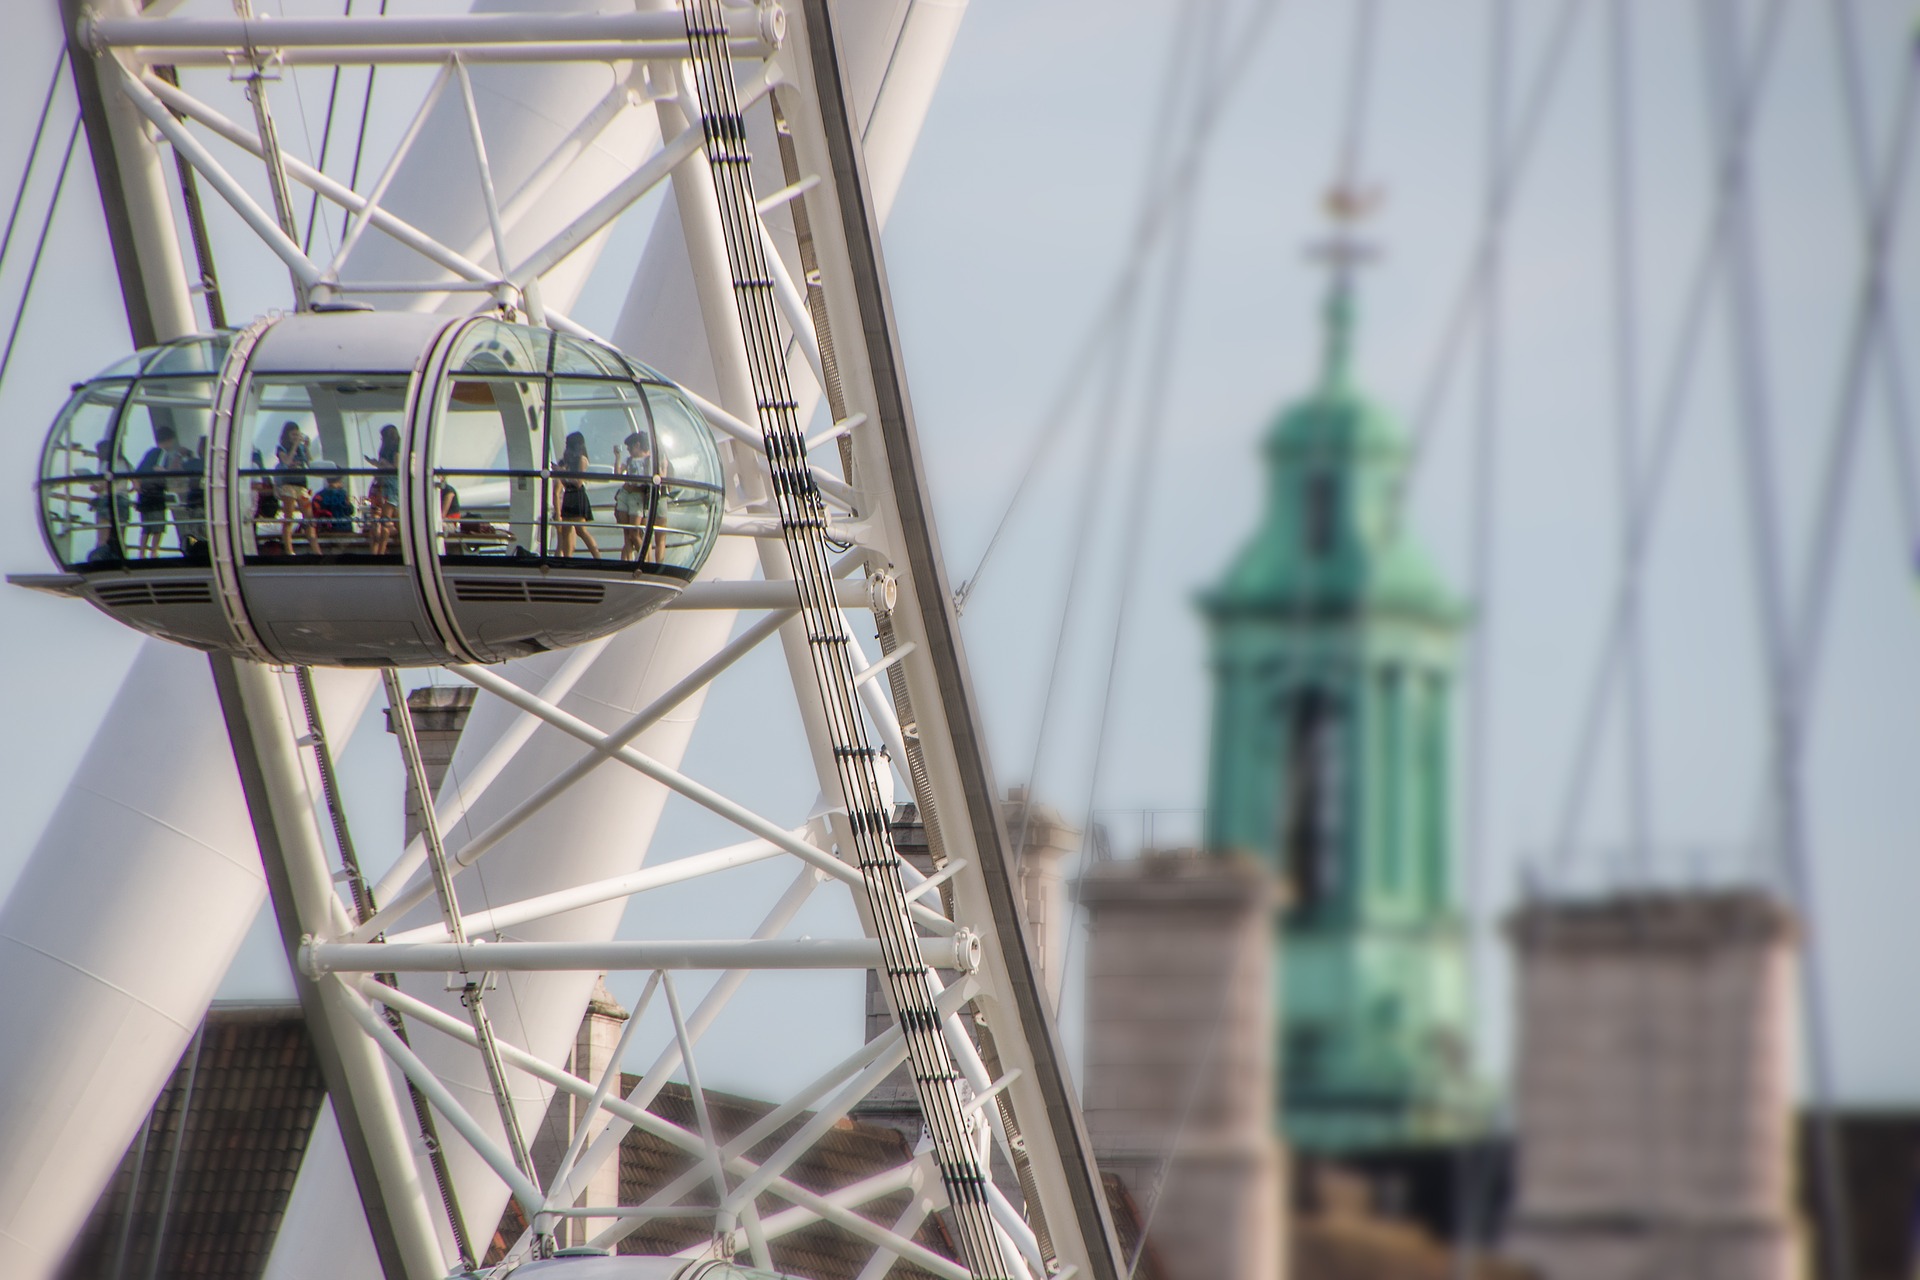 An artsy photograph of the famous London Eye, one of the most recognisable landmarks in London